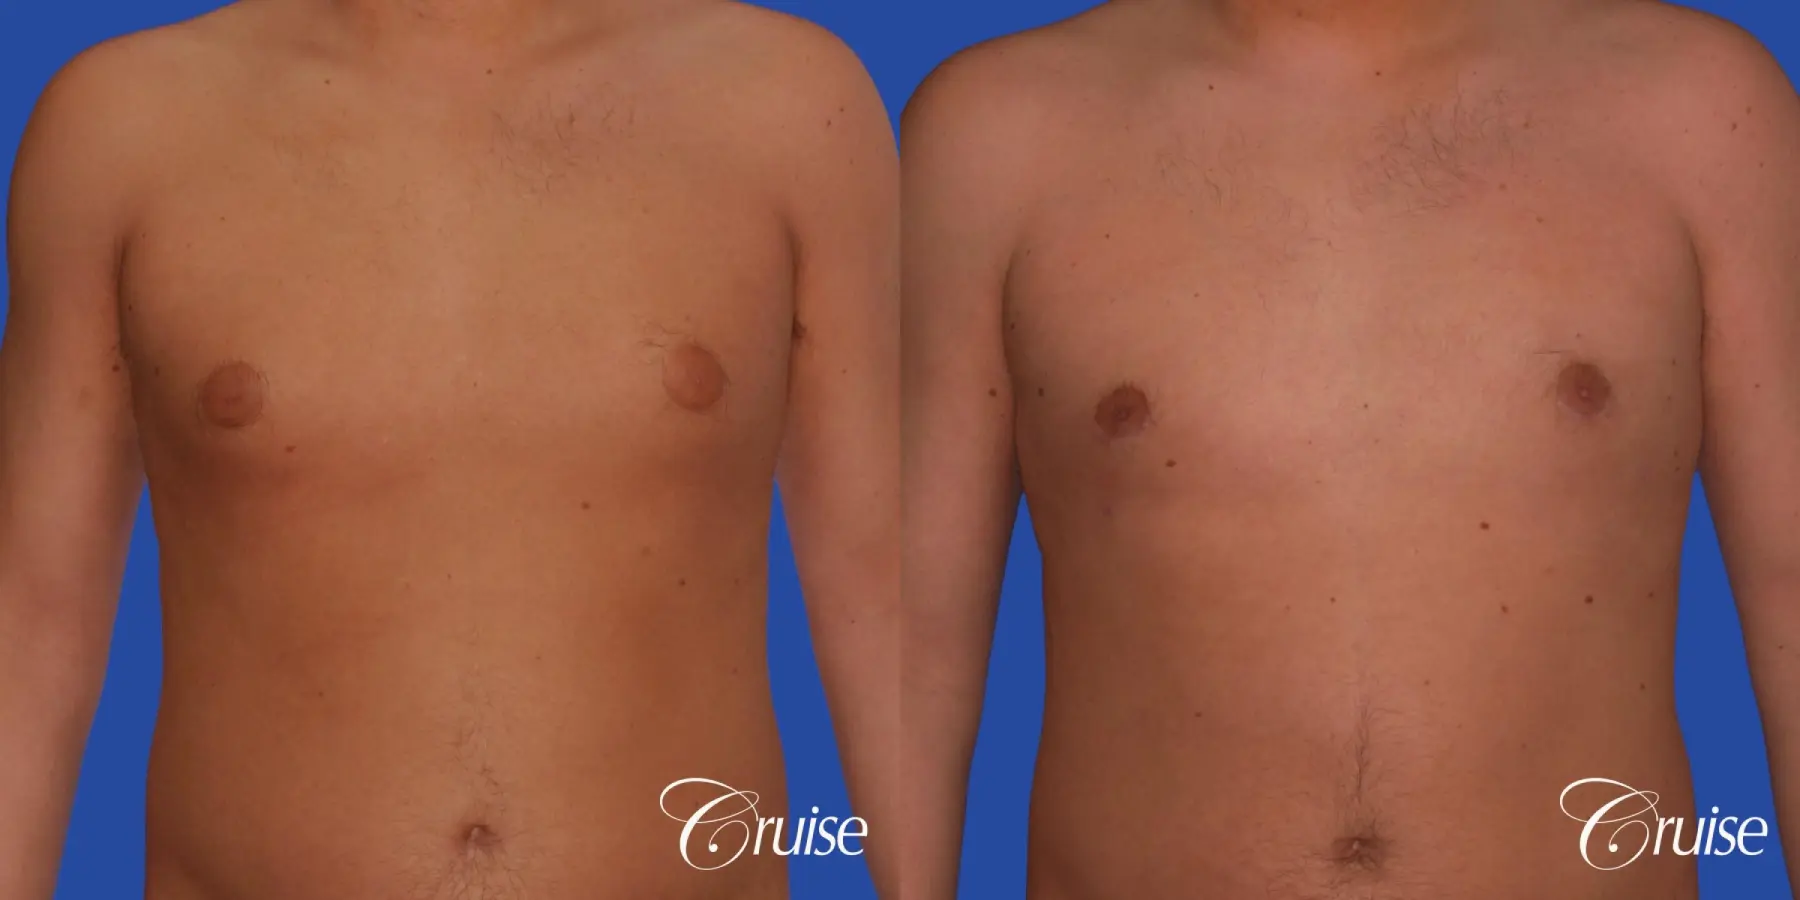 best puffy nipple gynecomastia results with plastic surgeon, Joseph Cruise, M.D. - Before and After 1